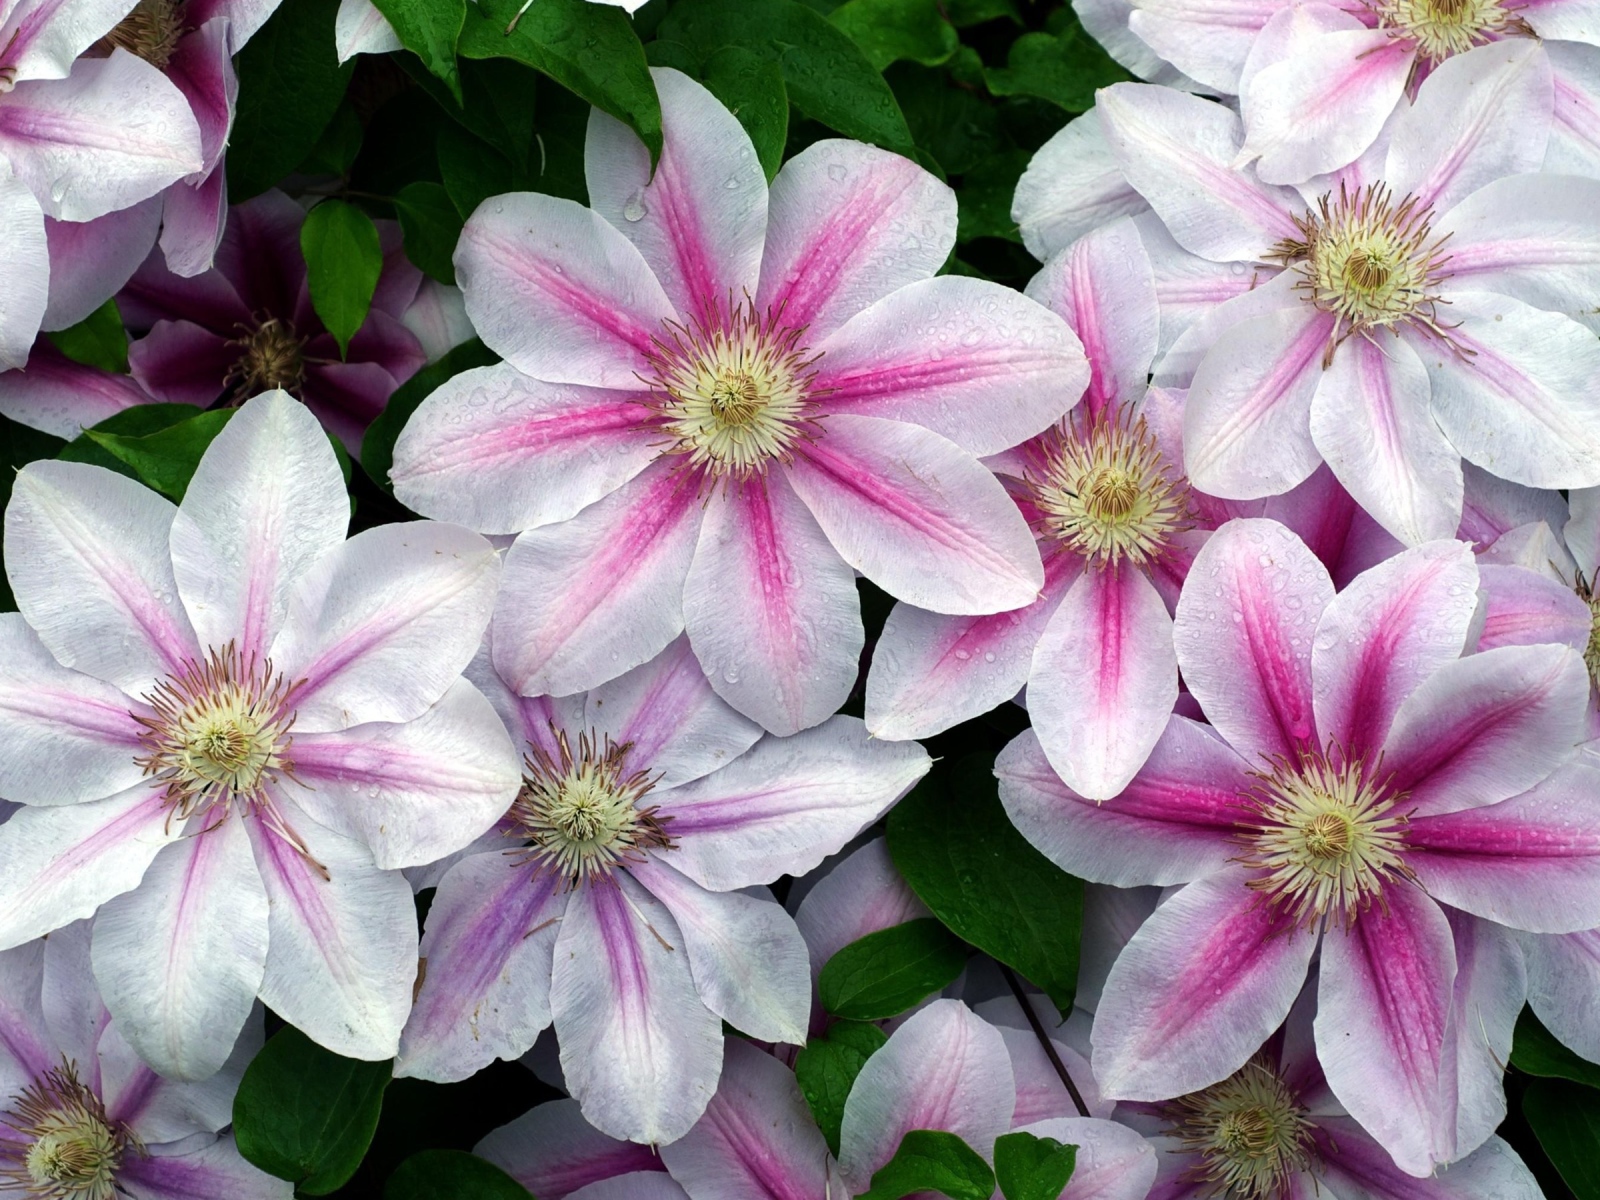 Pink and white clematis flowers